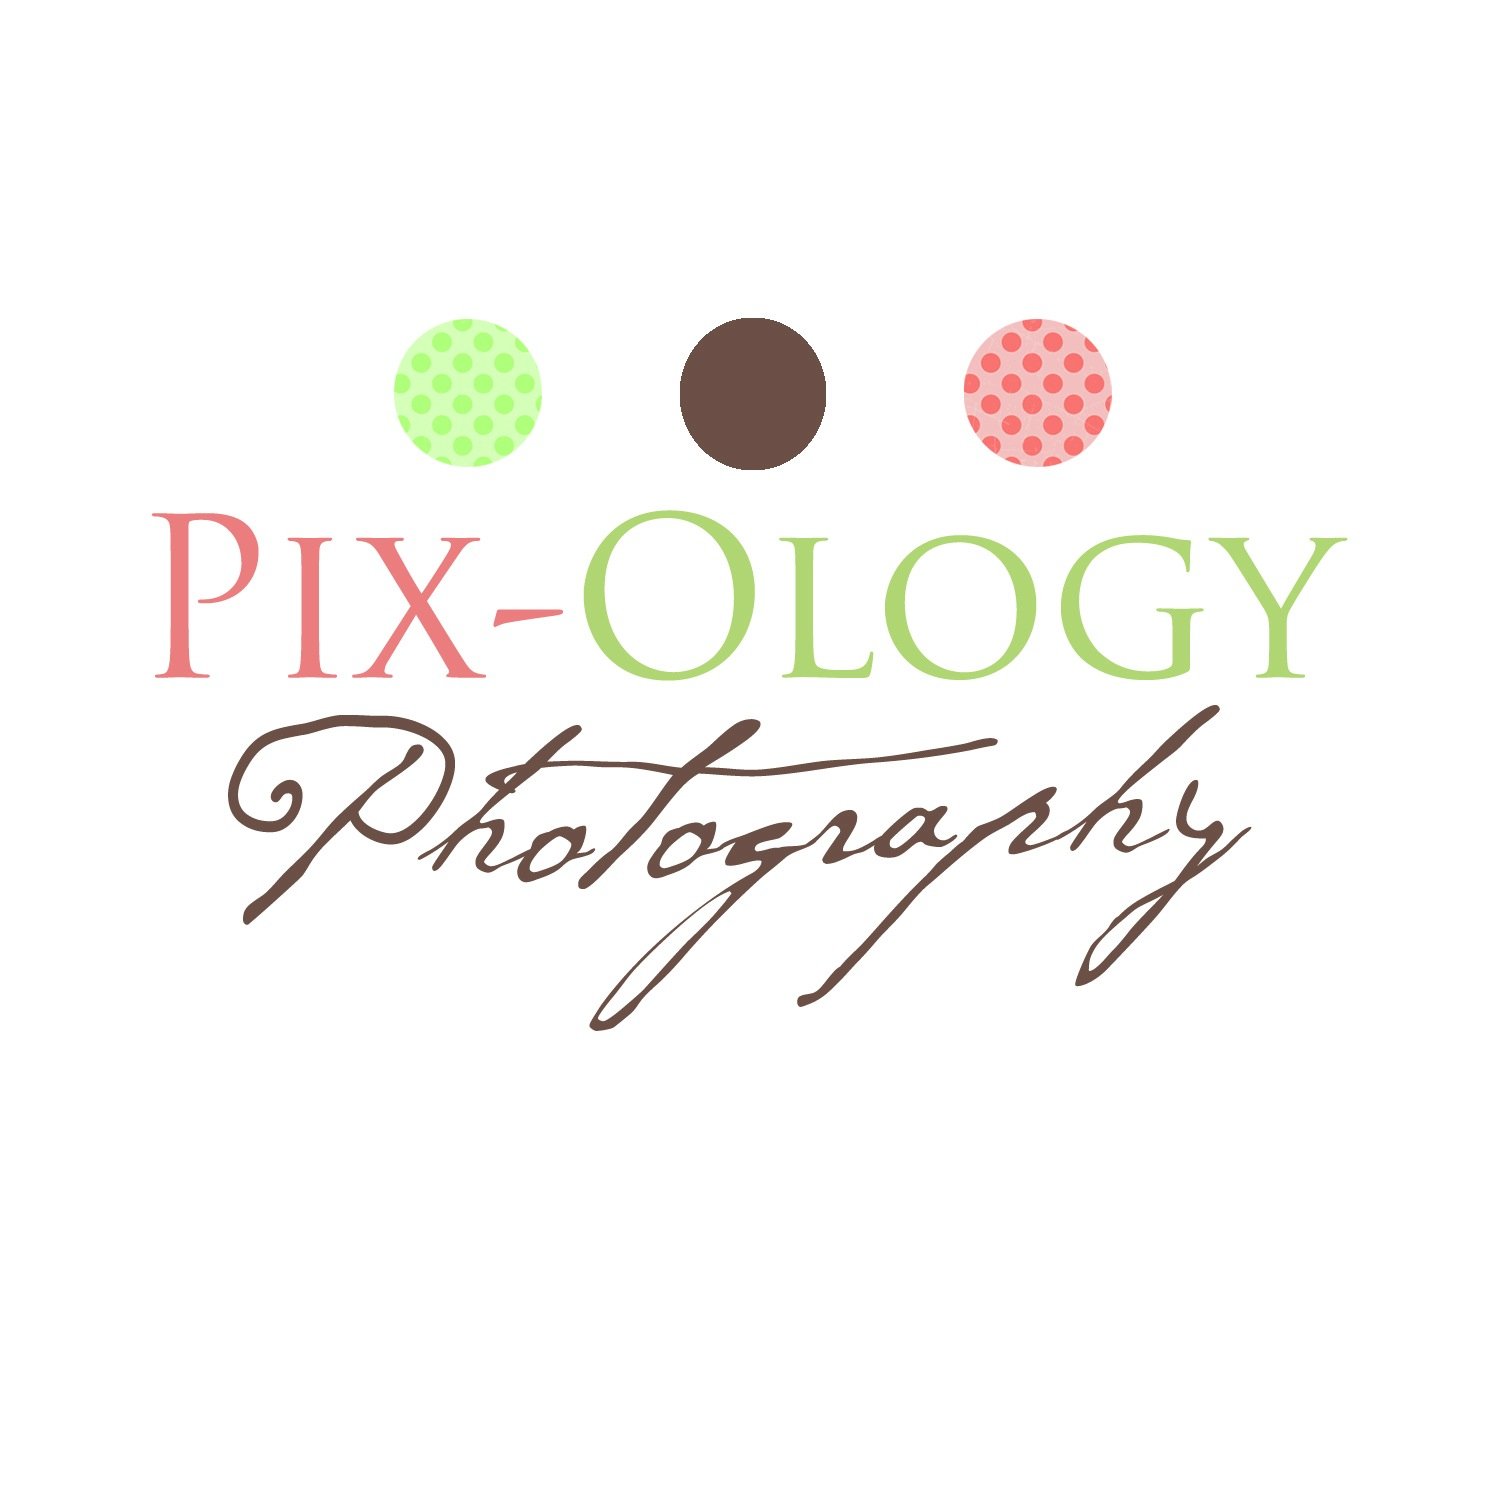 One of a kind children, family and wedding photography.  Pix-Ology is located in Bethlehem, PA but available for worldwide travel